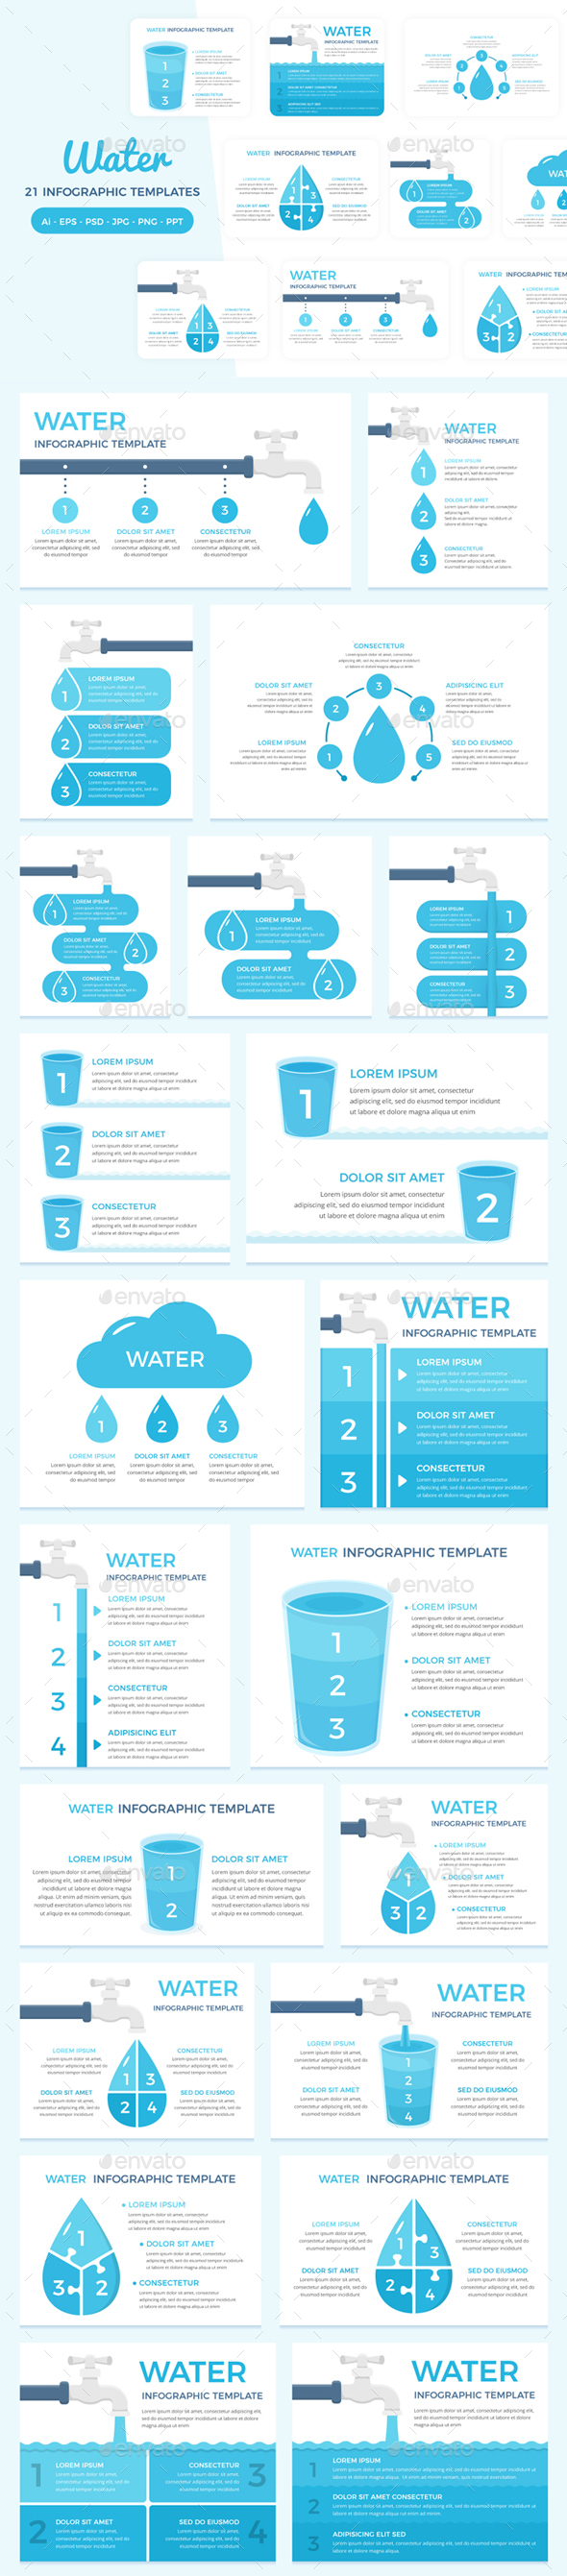 [DOWNLOAD]Water - Infographic Templates